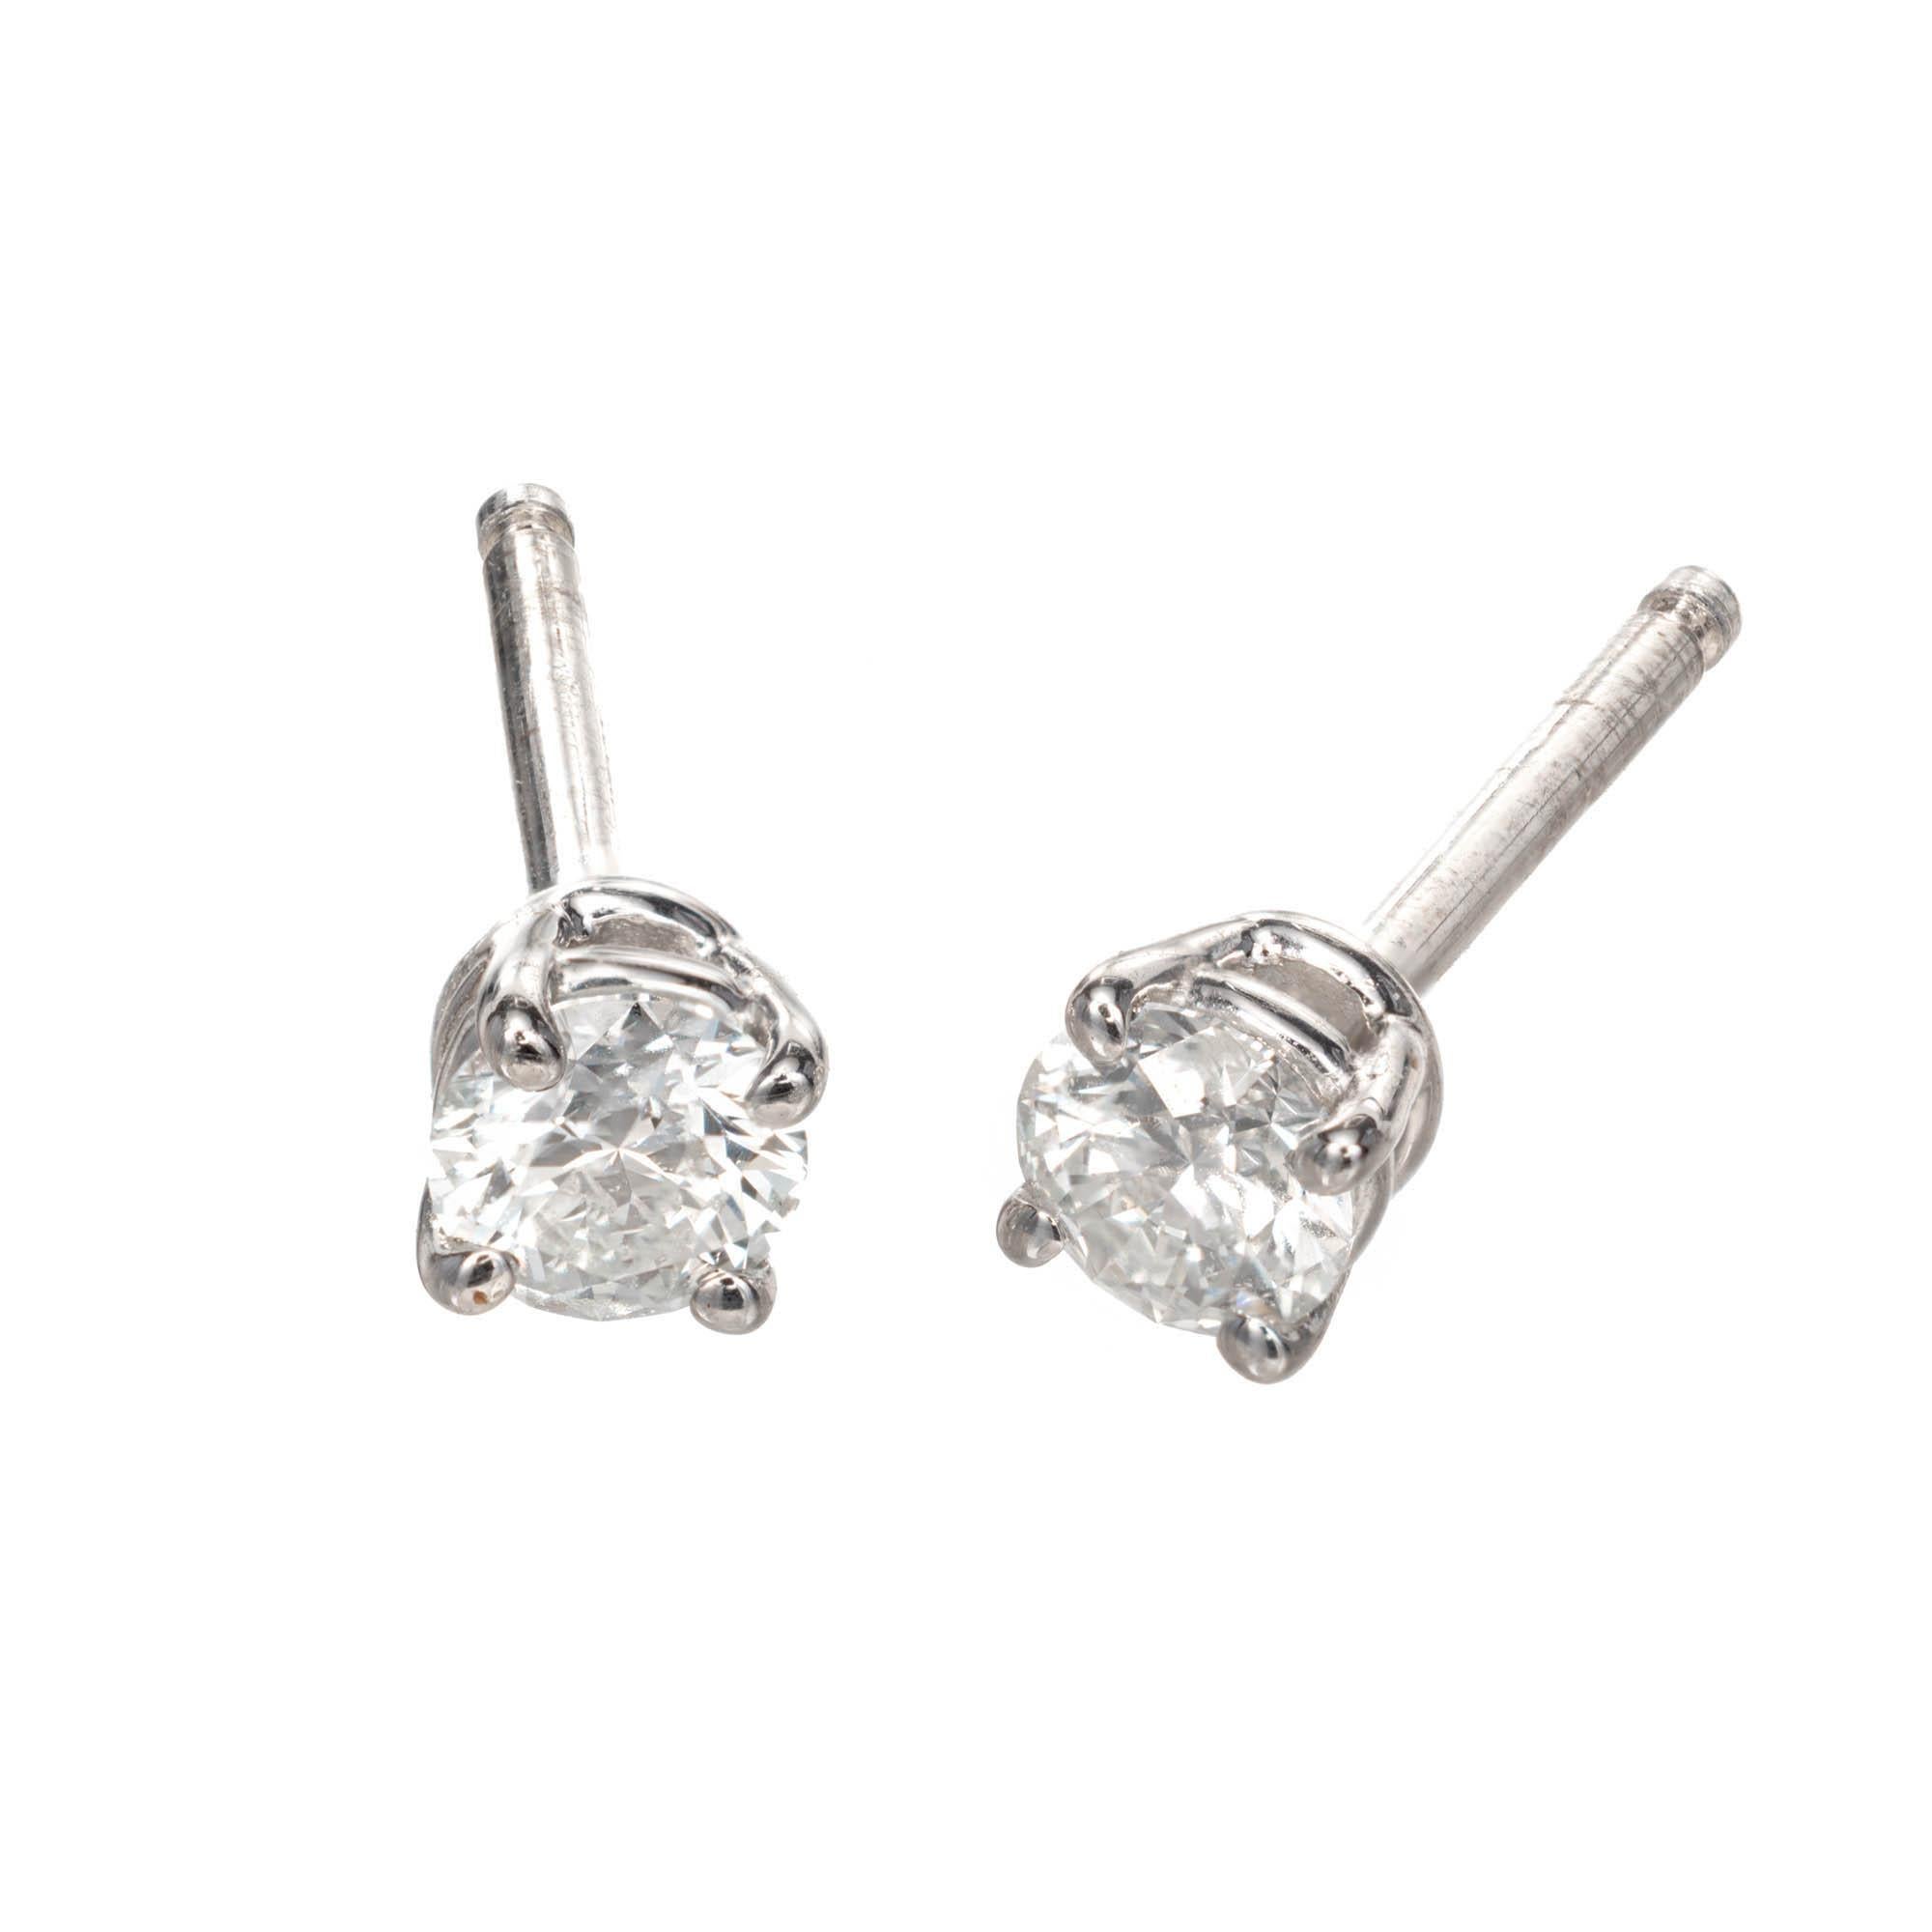 Tiffany & Co solitaire diamond stud earrings. Round brilliant cut diamonds set in platinum matched for size, color, clarity.

2 round brilliant cut H VSI diamonds, Approx. .40ct 
Tiffany & Co diamond certificate: 18608154/ E10080009.  18608154/